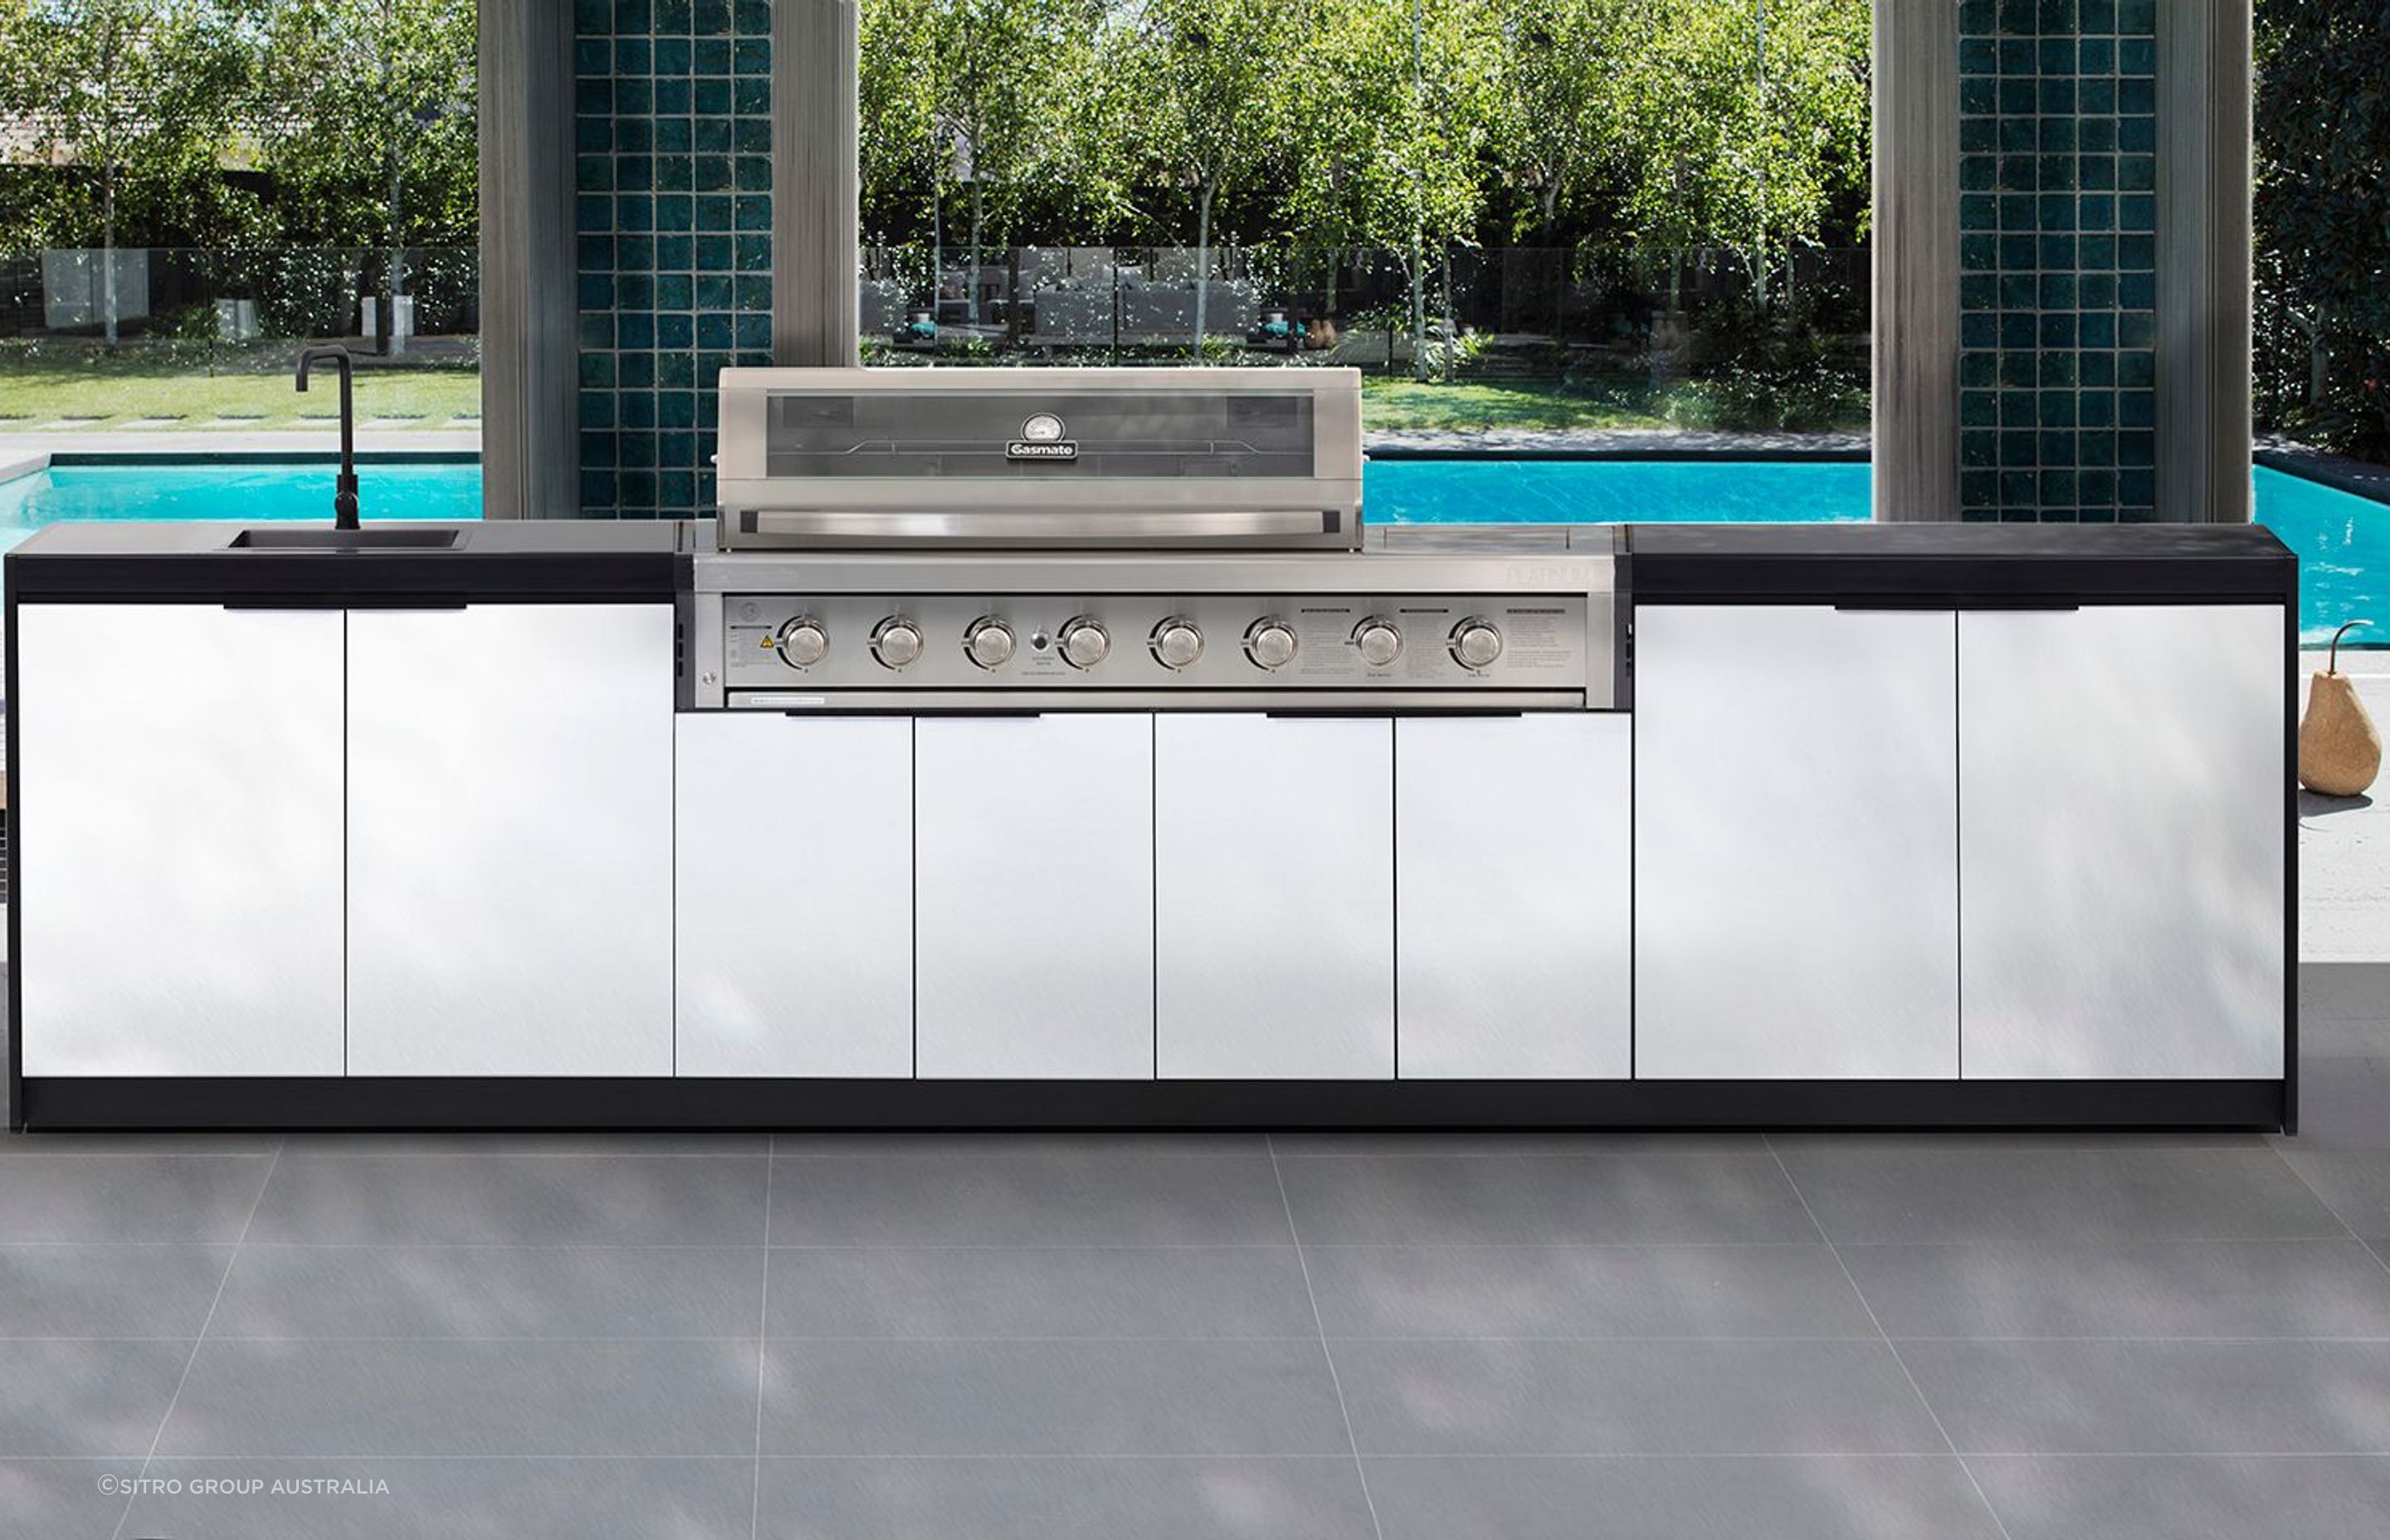 AlfrescoPlus Double Storage Module gives you an exceptional amount of storage to keep your outdoor kitchen neat and tidy